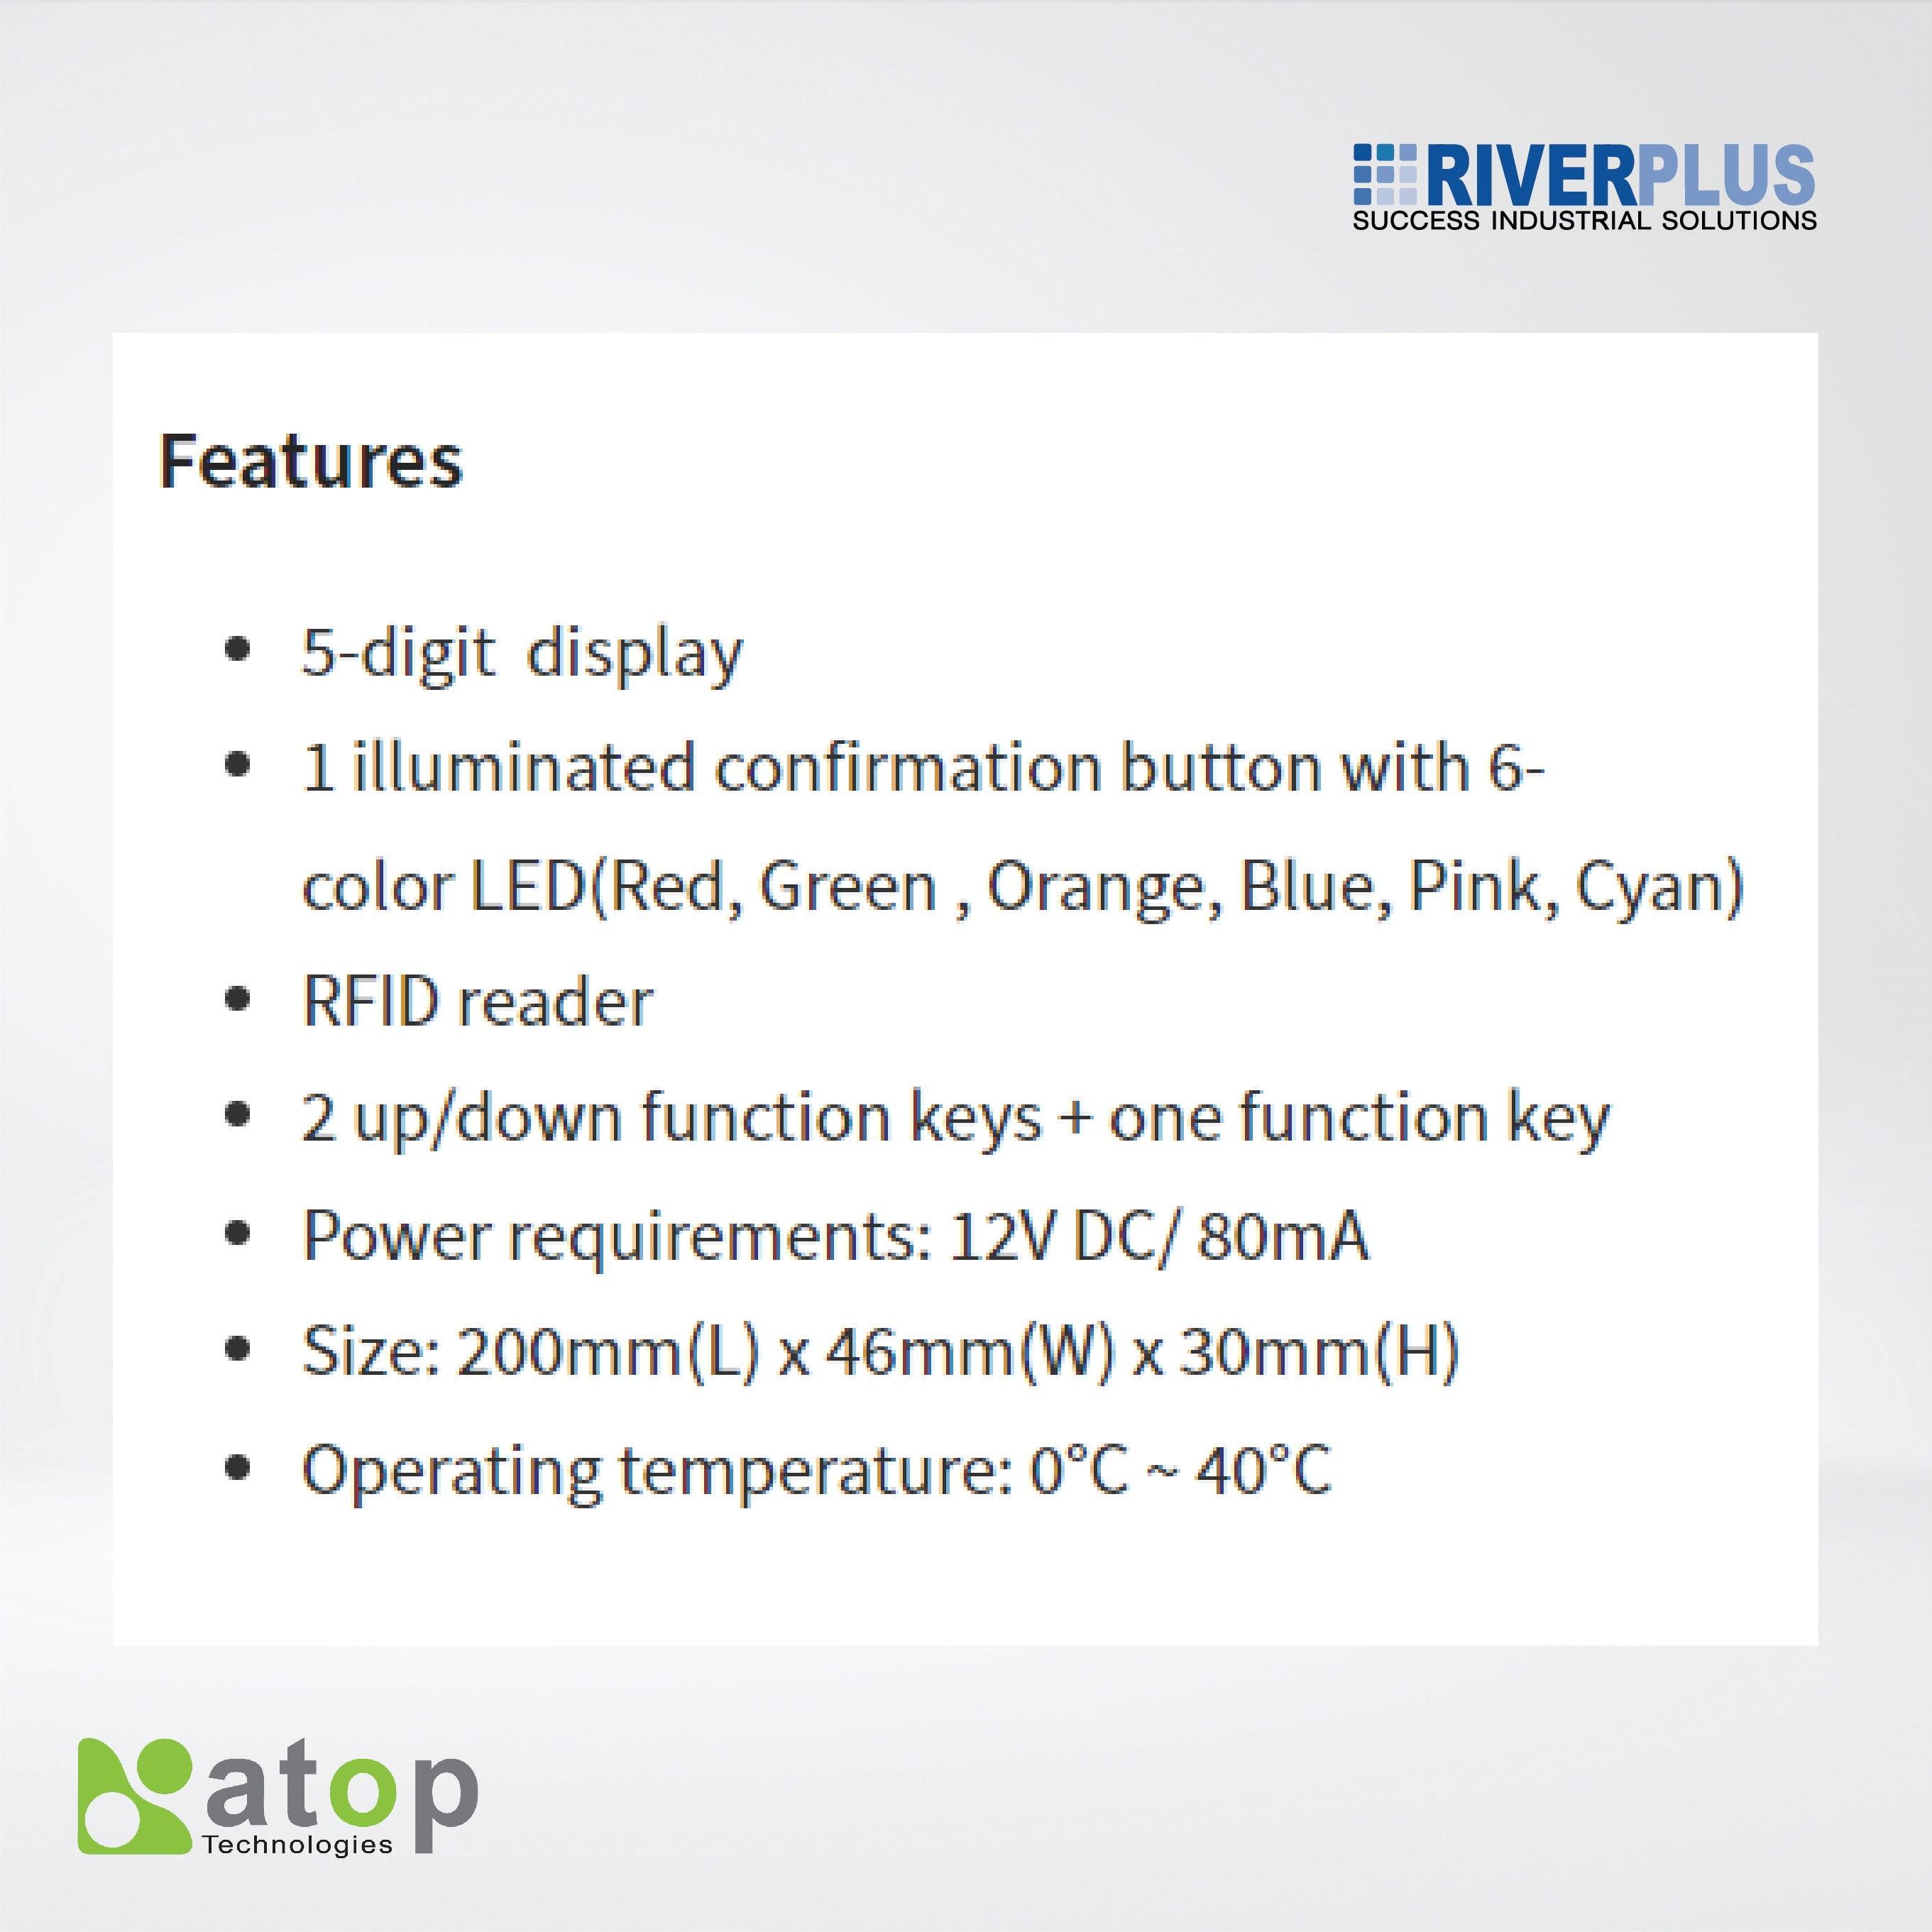 AT705-RFID 5-digit, Pick Tag with RFID Confirmation - Riverplus